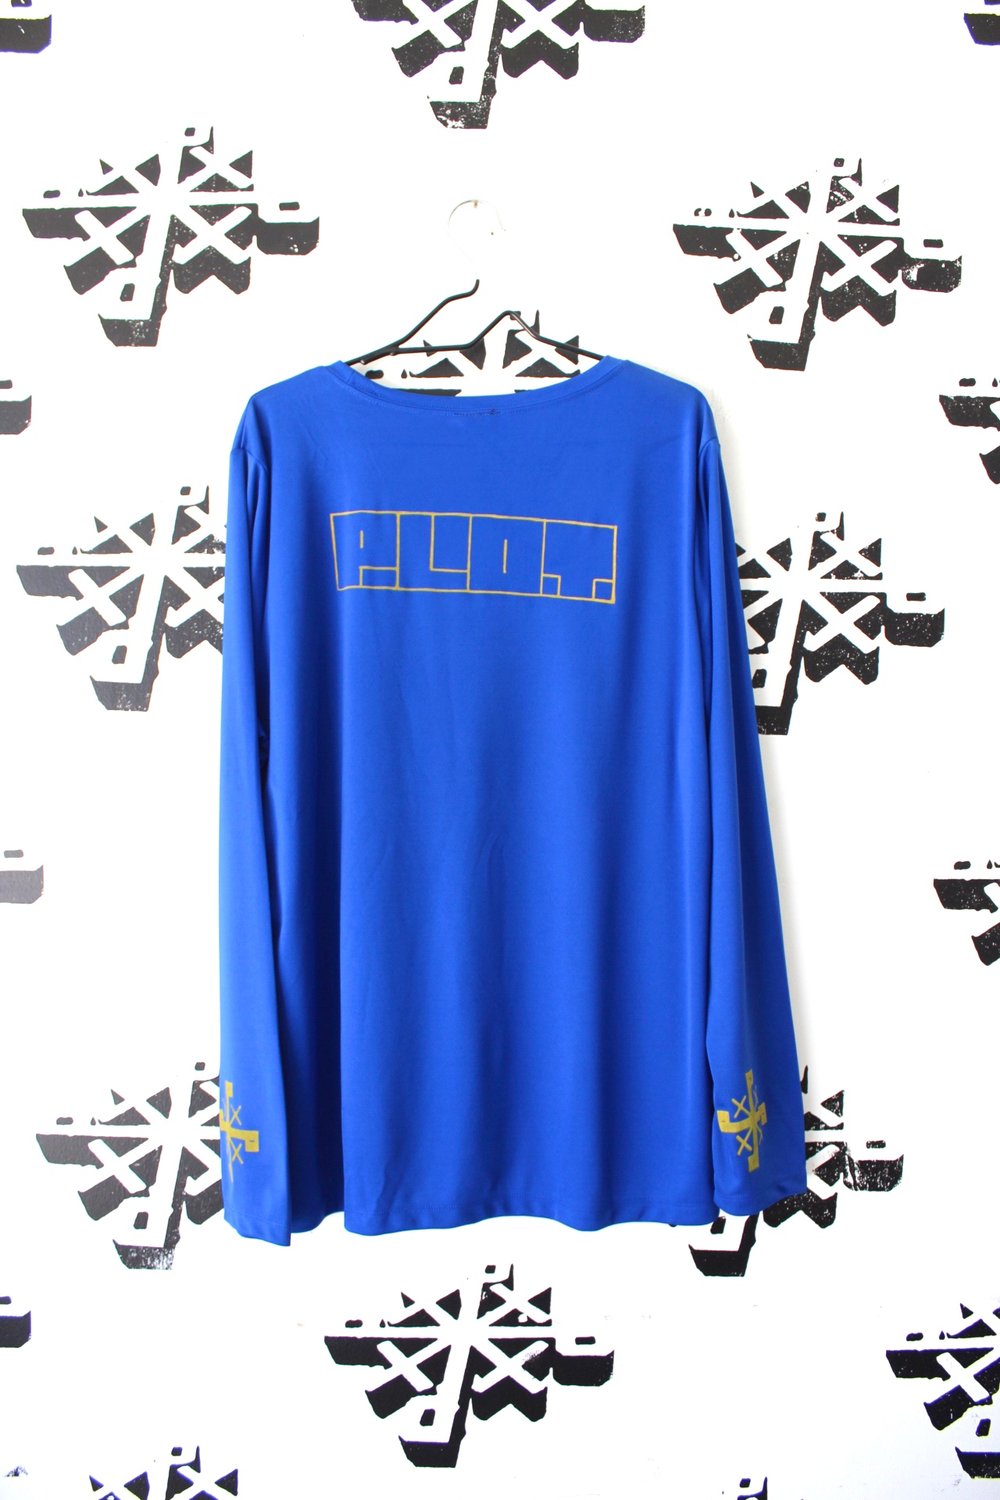 stack long sleeve in blue 